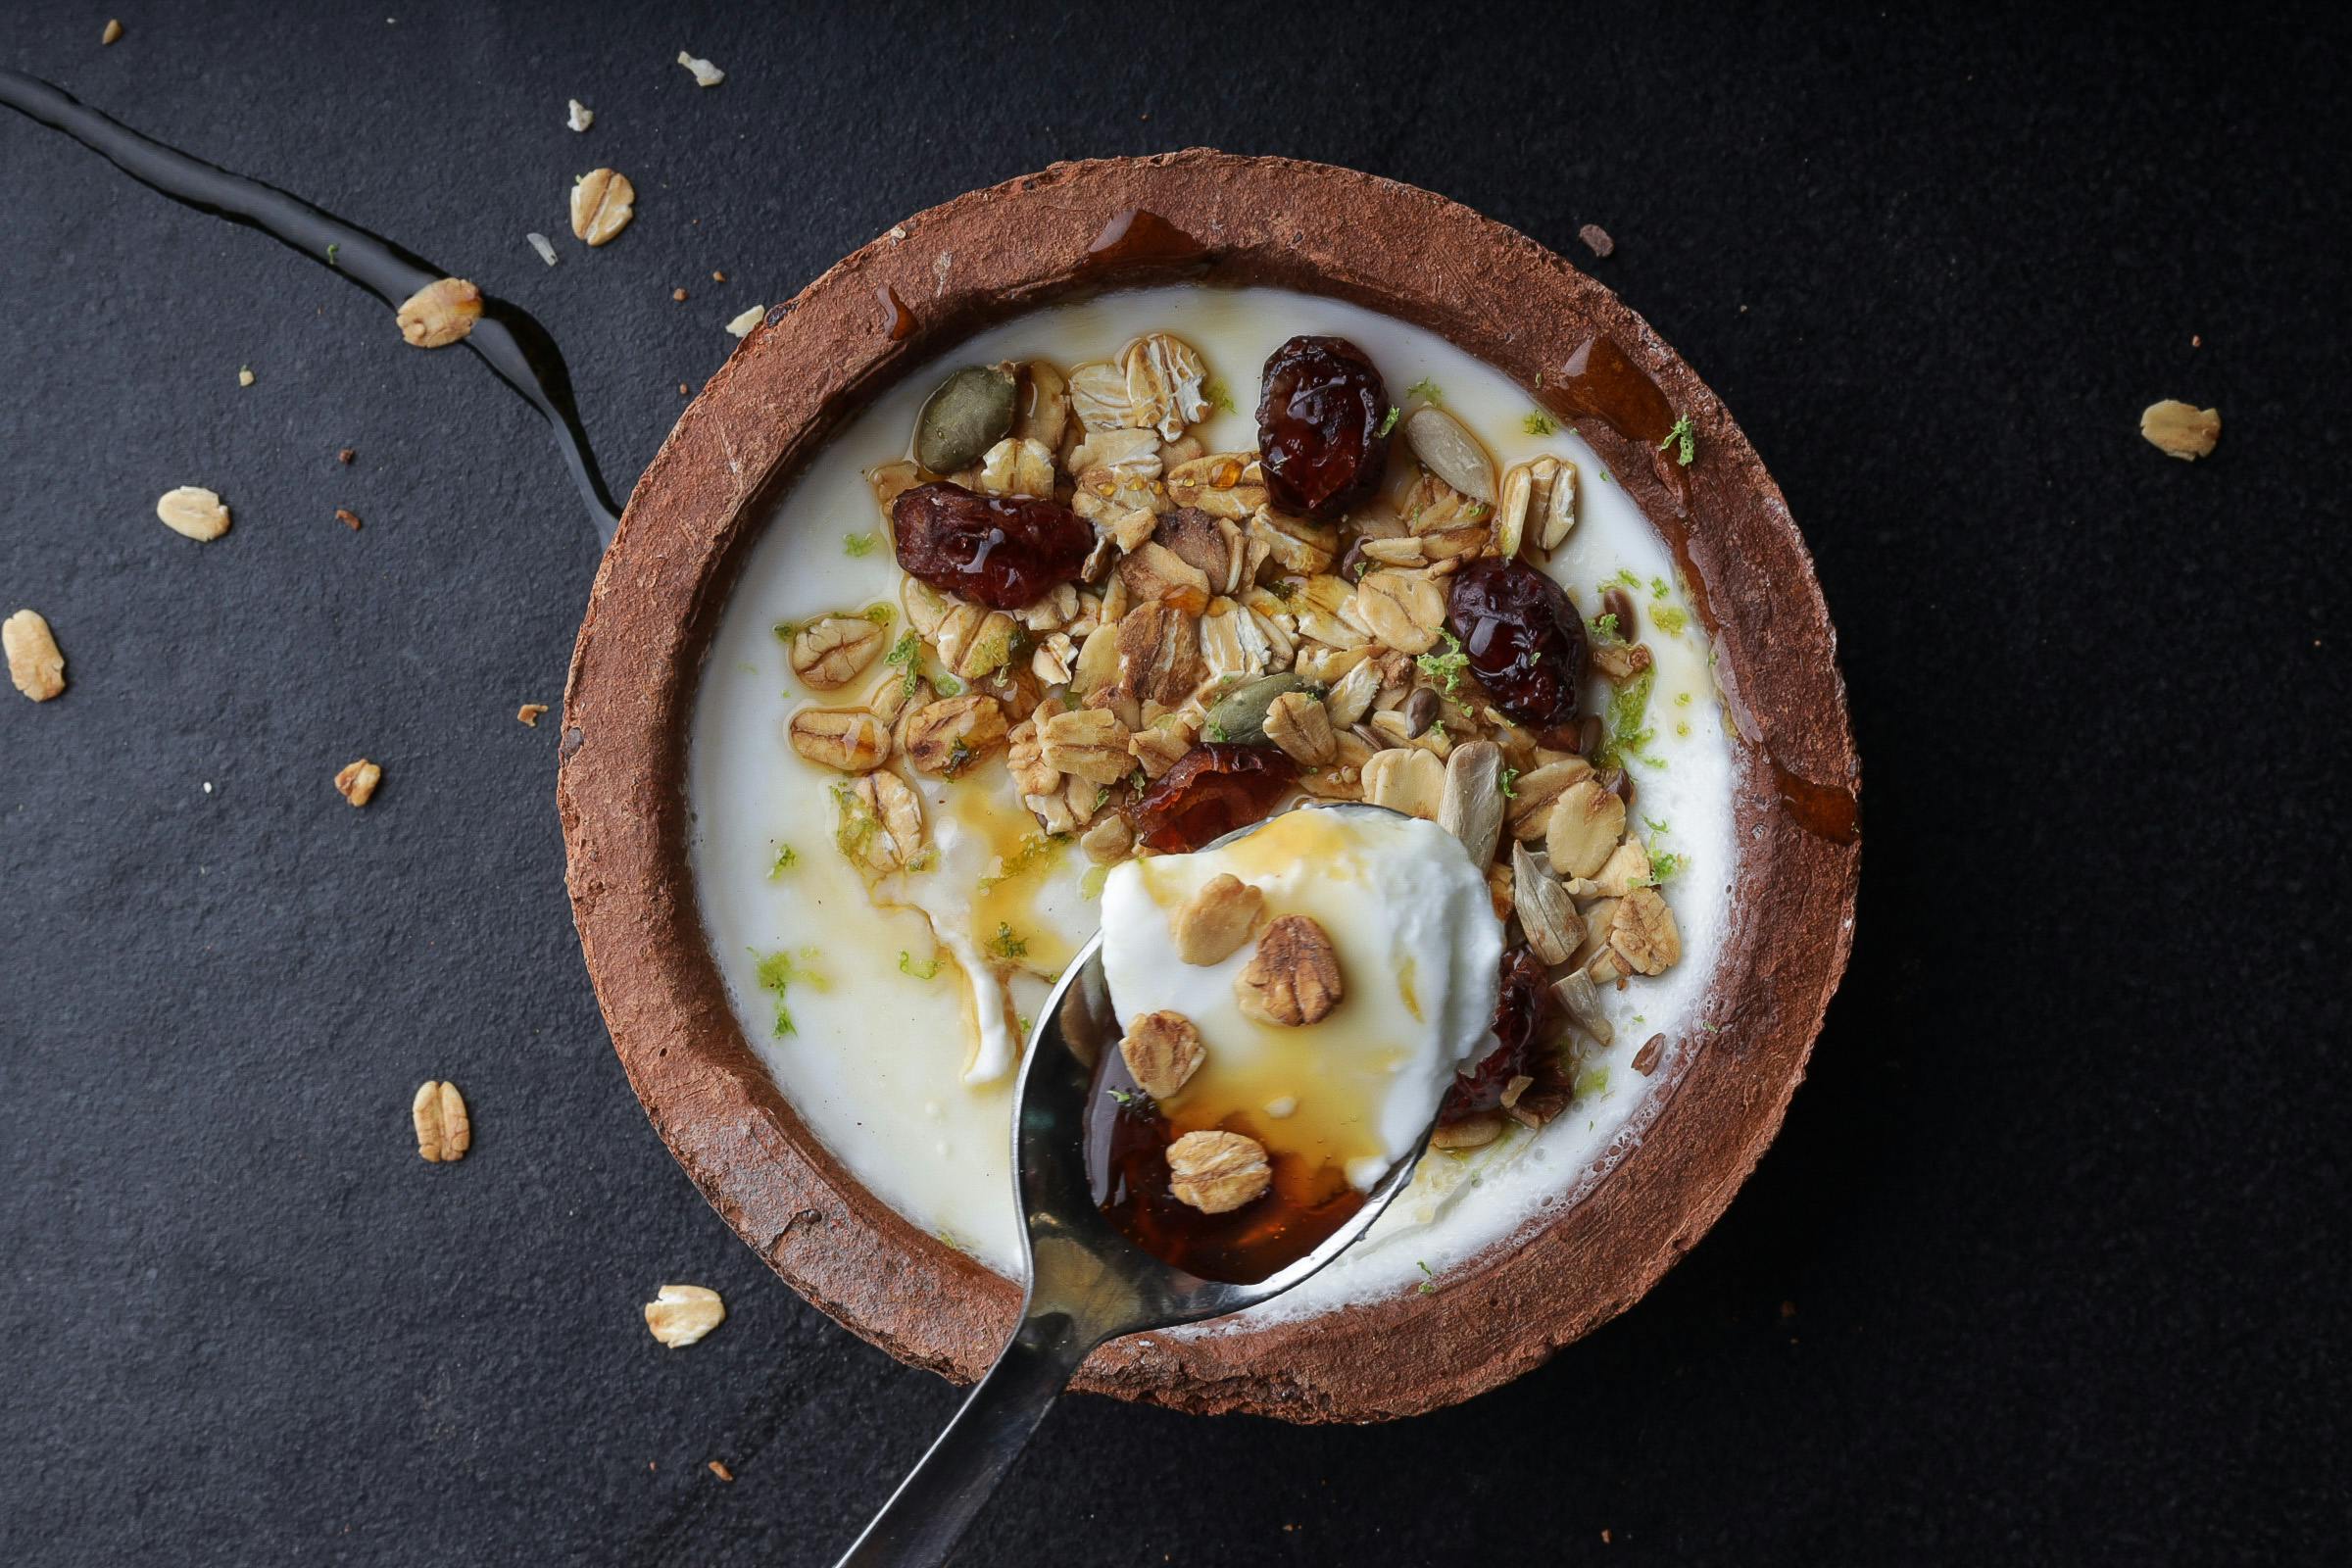 Buffalo milk curd topped with granola and kithul syrup. (Photo: Karvin Fernando)